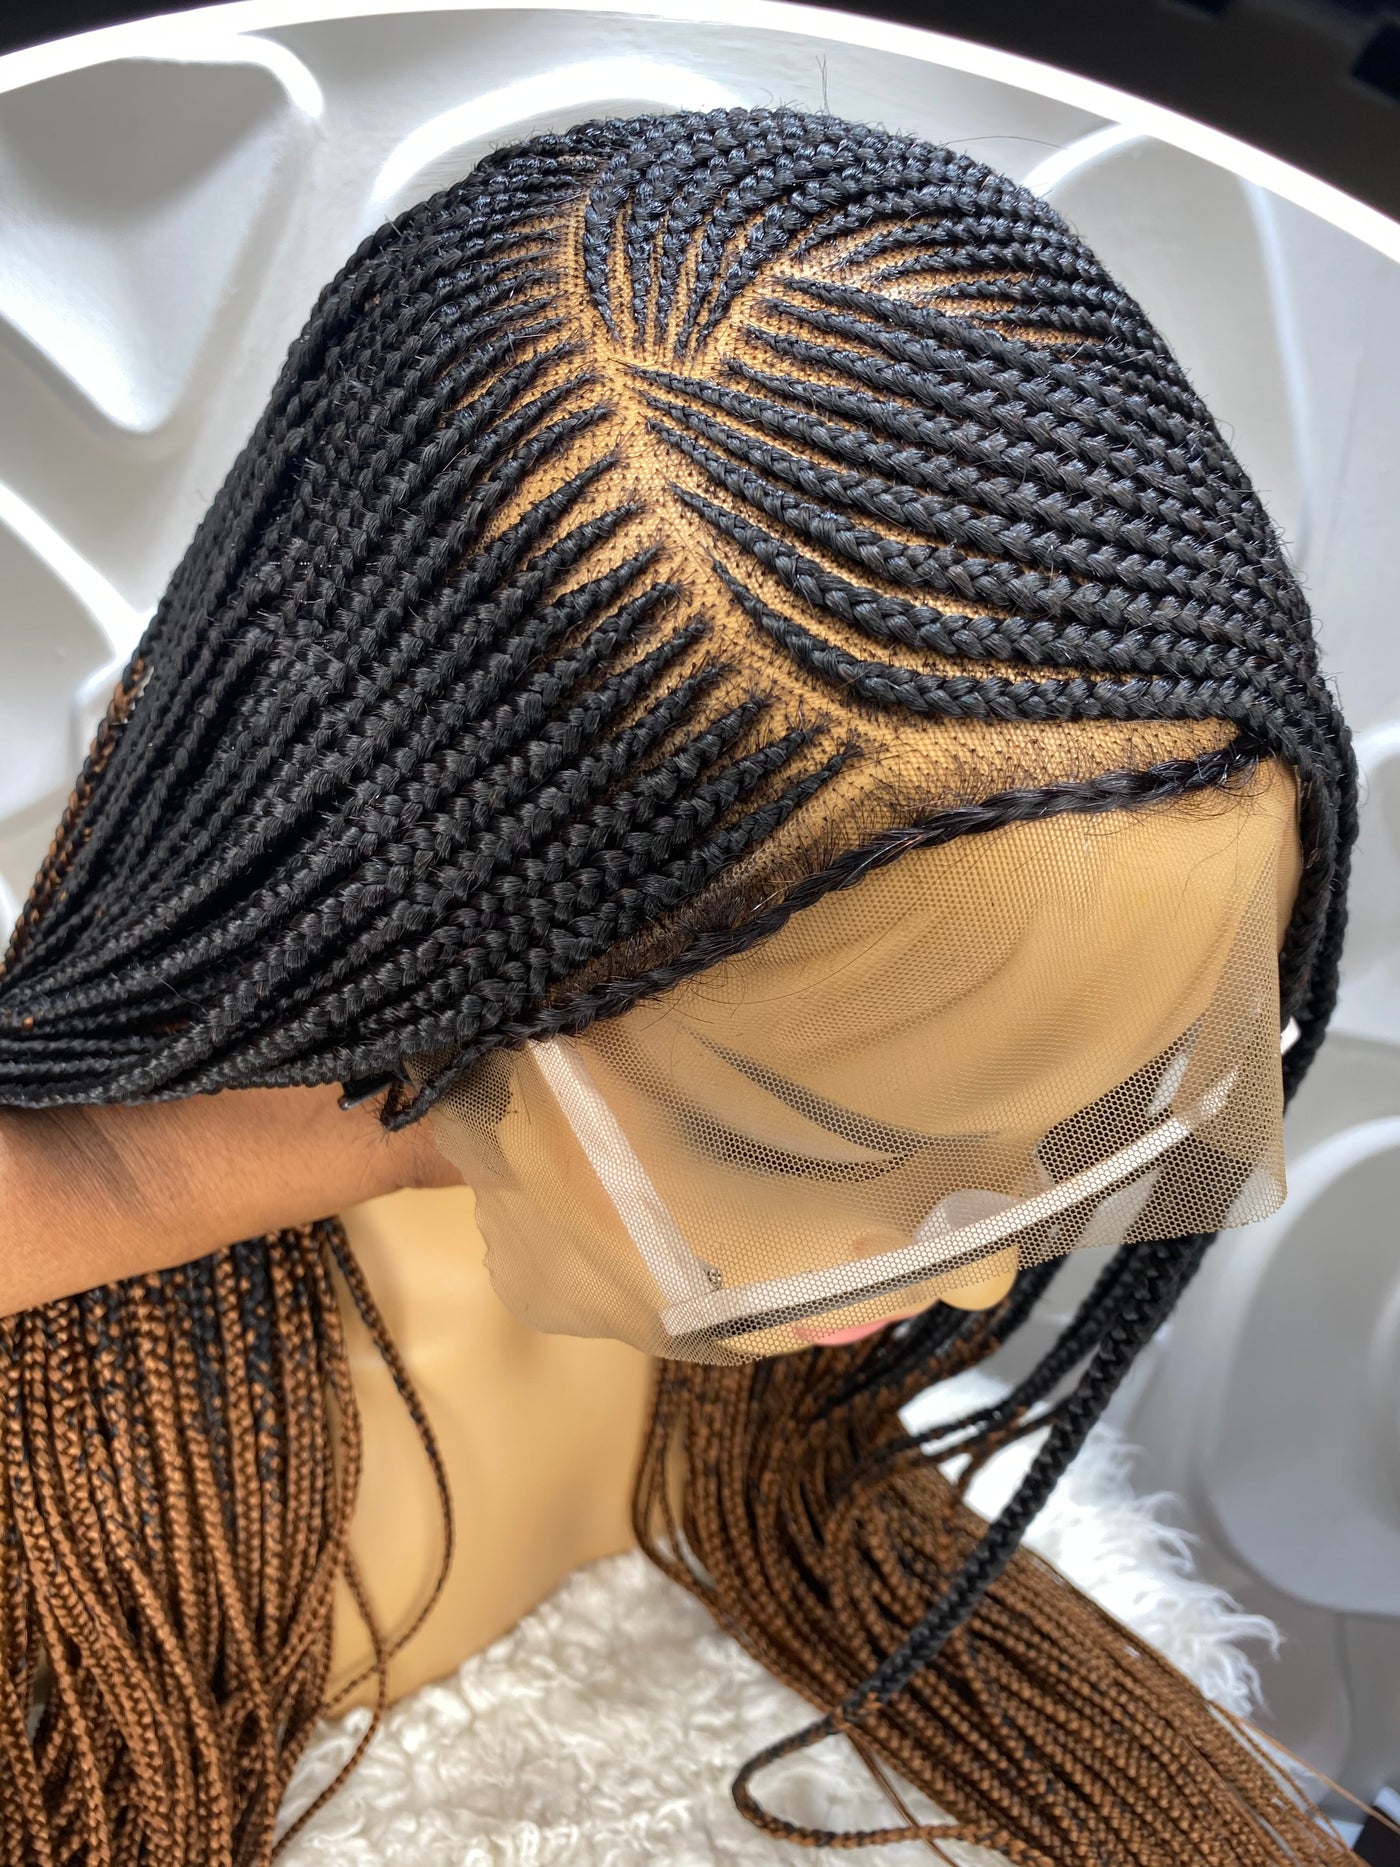 13 by 6 Lace Frontal Cornrow Braided Wig